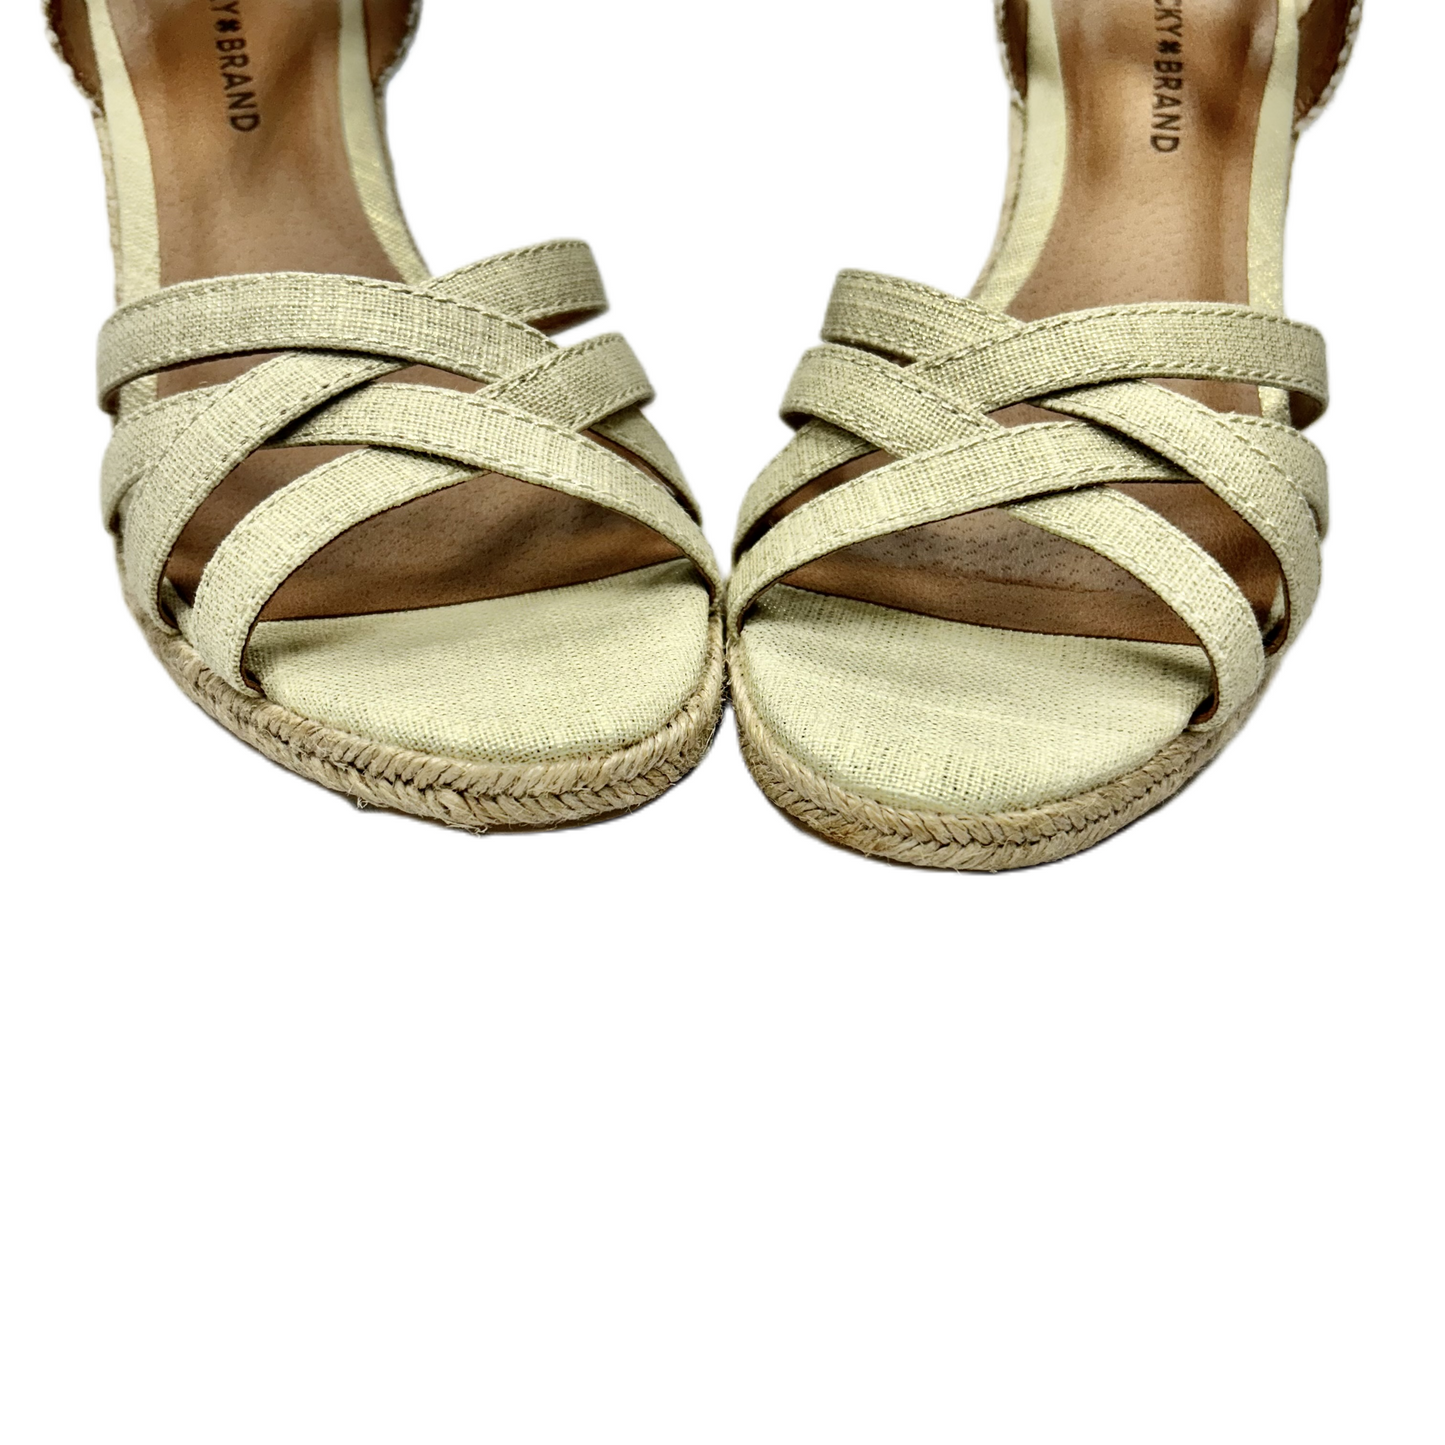 Sandals Heels Wedge By Lucky Brand  Size: 10